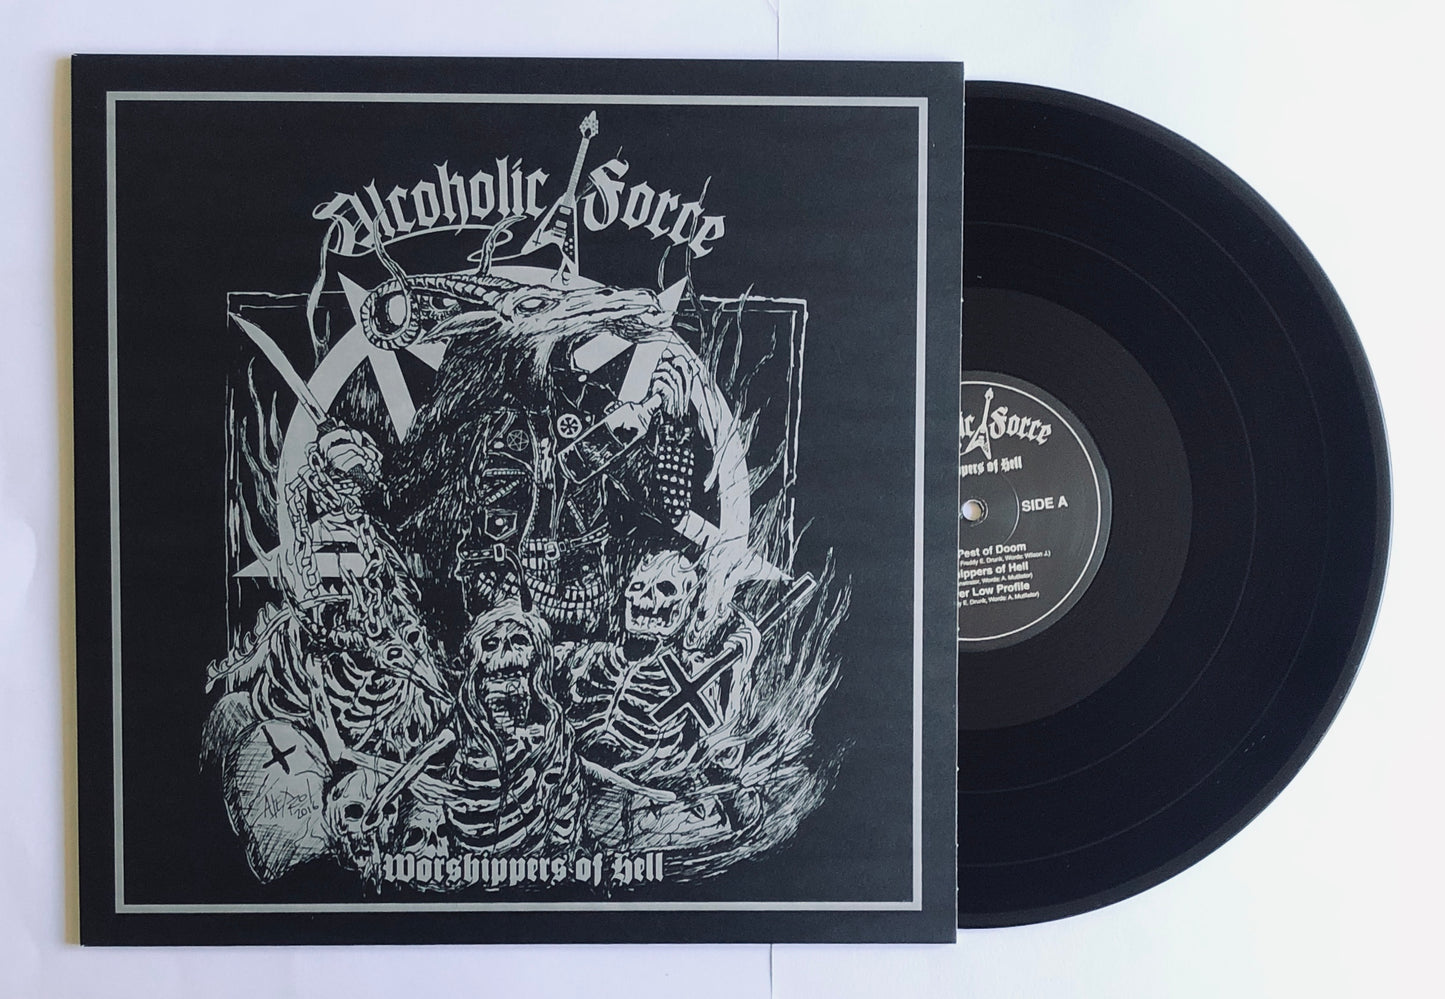 Alcoholic Force (Col) "Worshippers of Hell" - 12" LP + CD